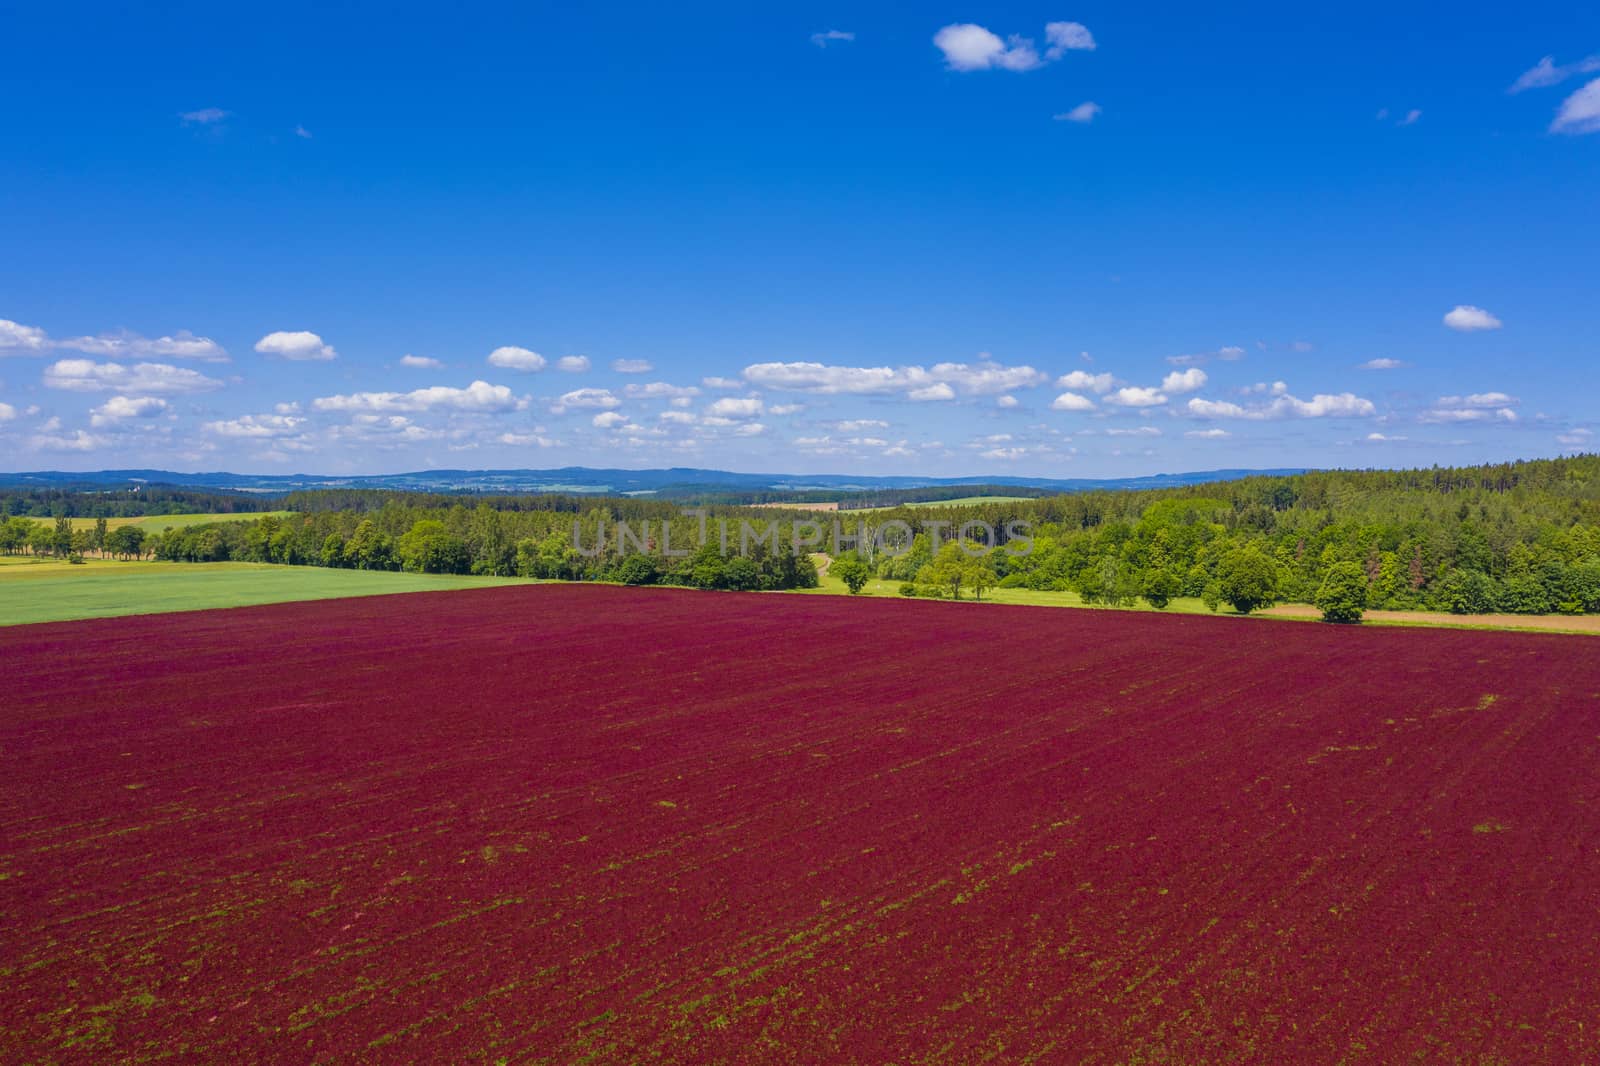 Crimson clover field and forest from above by fyletto